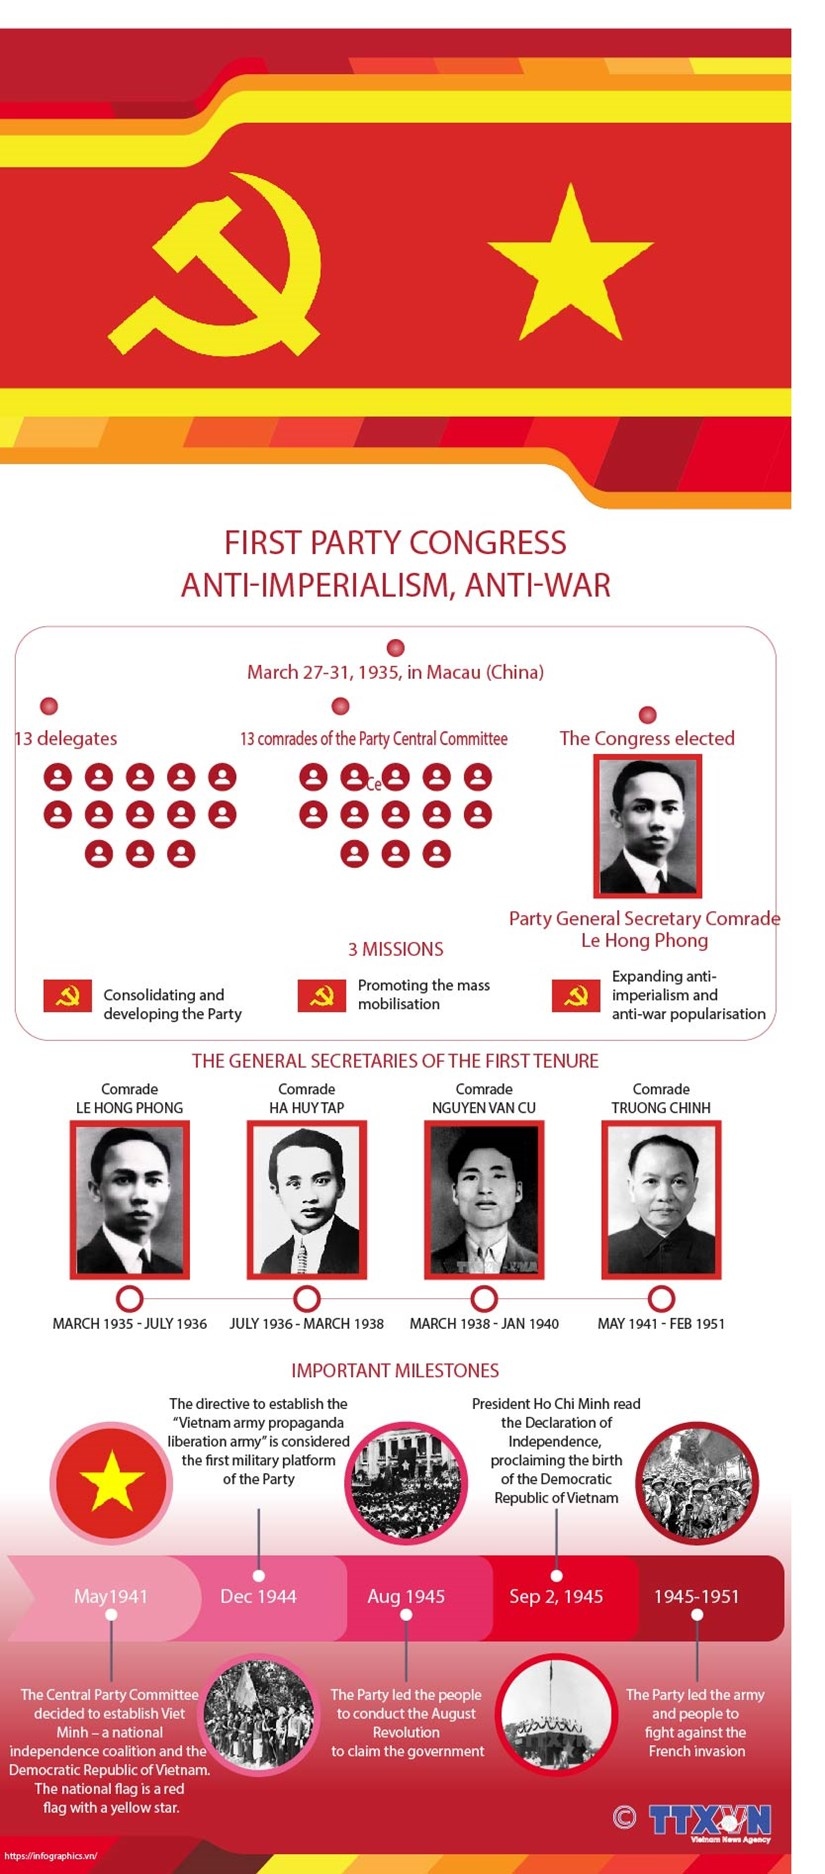 first party congress anti-imperialism, anti-war picture 1